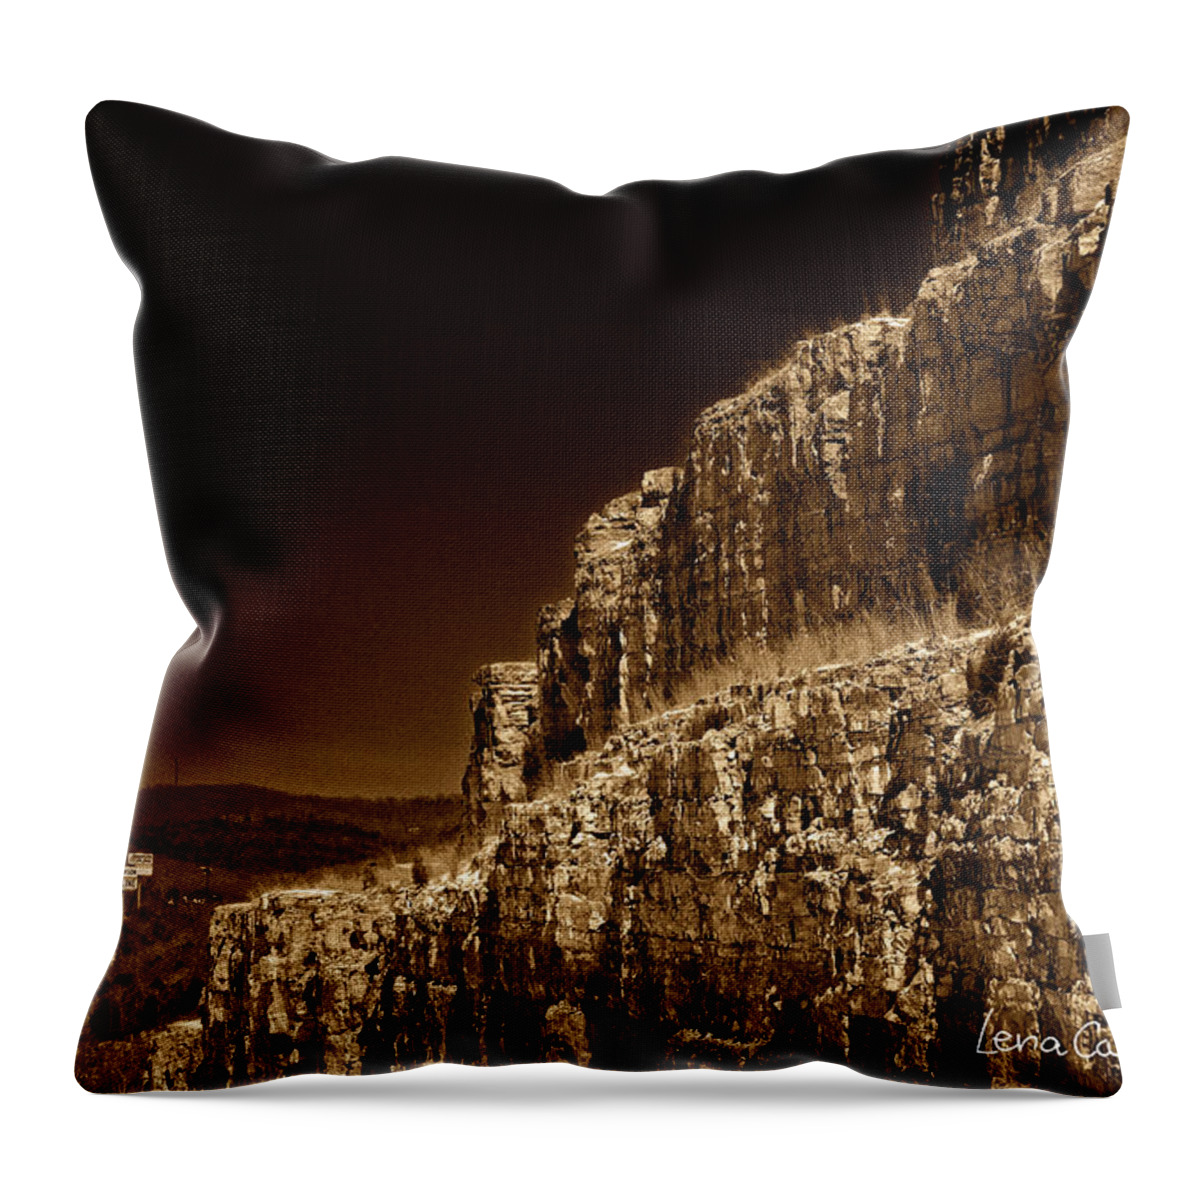 Landscape Throw Pillow featuring the photograph Branson Travels by Lena Wilhite